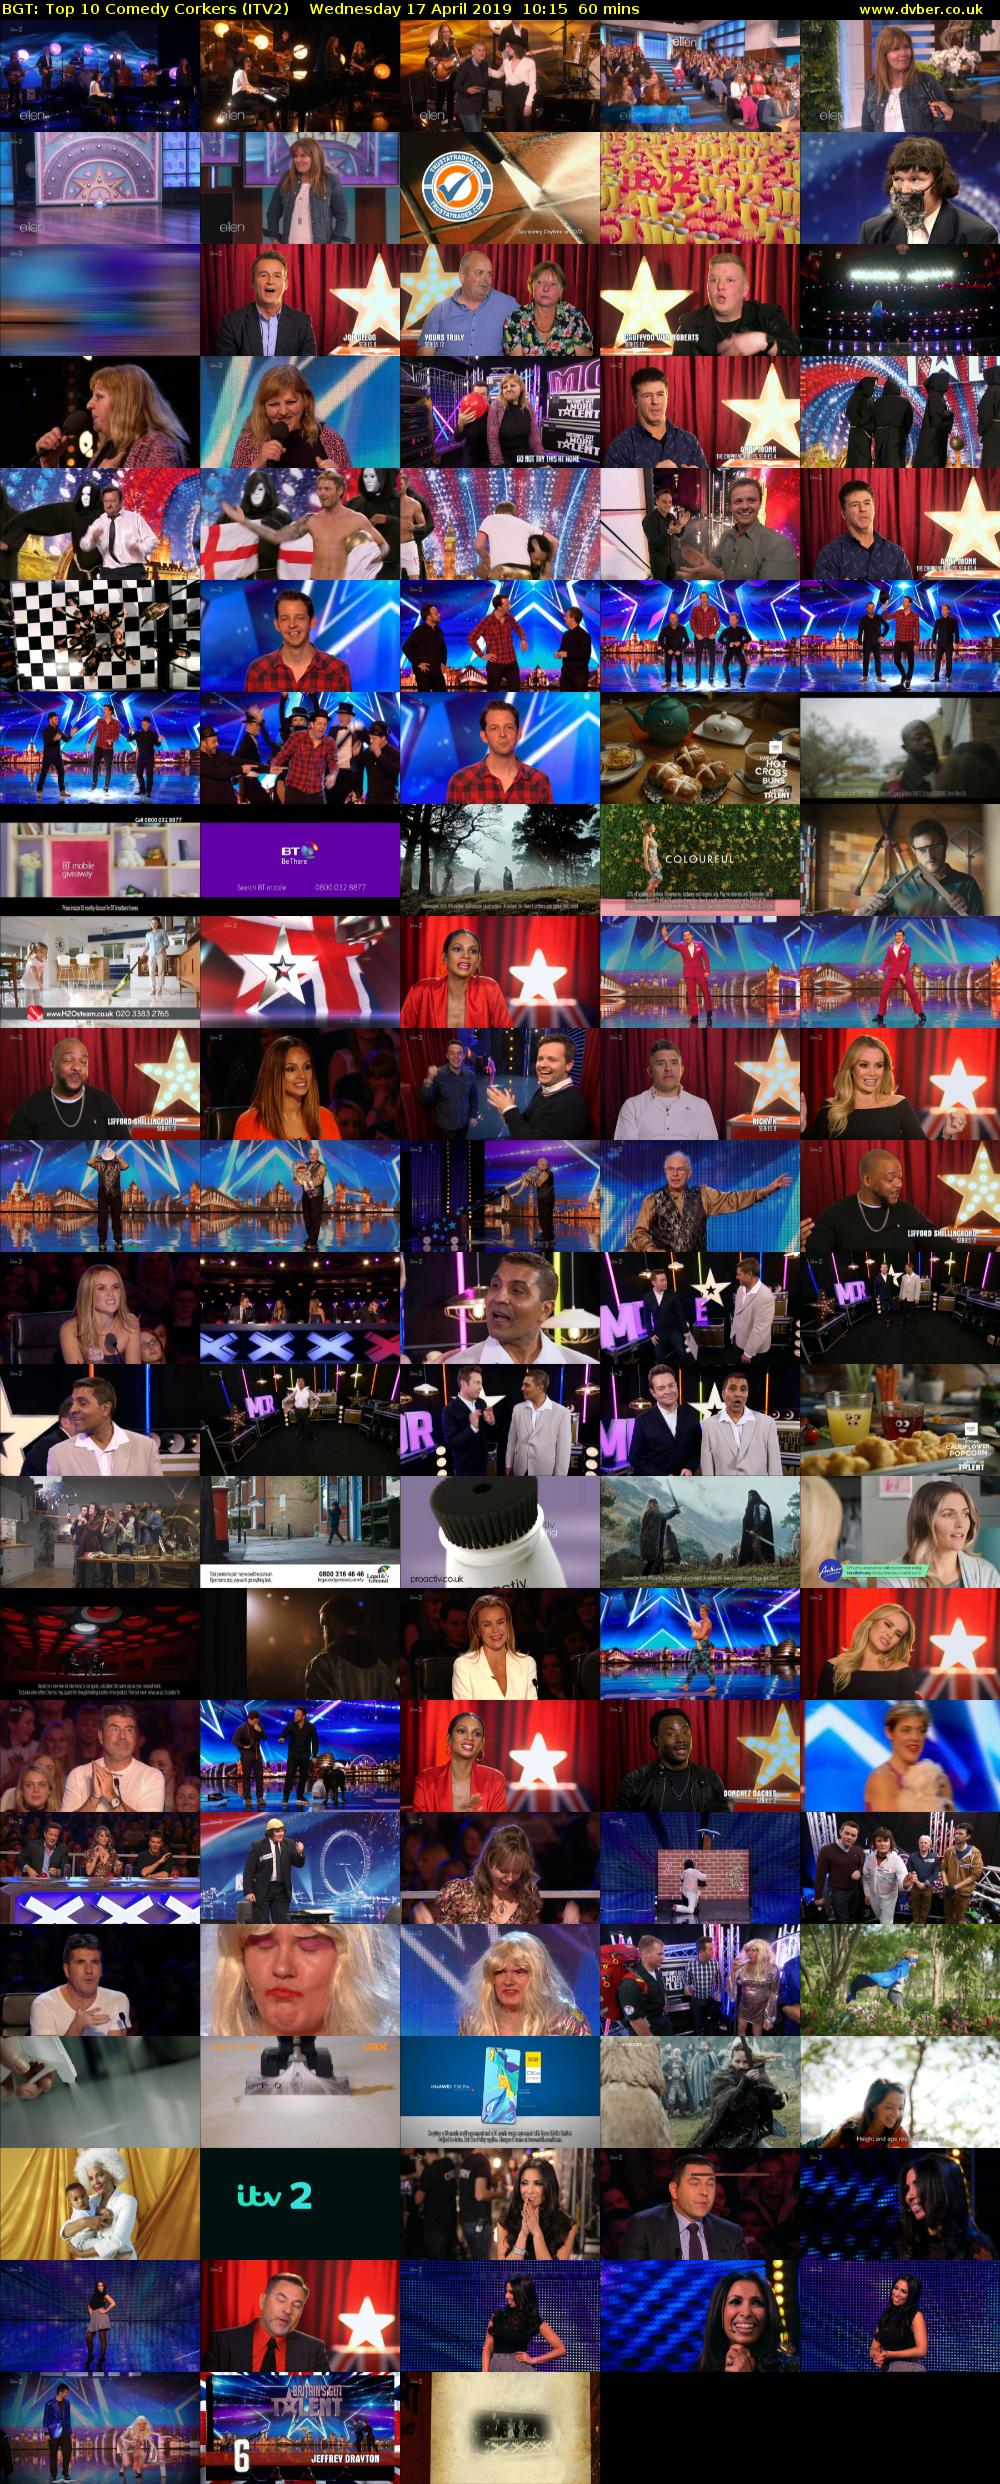 BGT: Top 10 Comedy Corkers (ITV2) Wednesday 17 April 2019 10:15 - 11:15